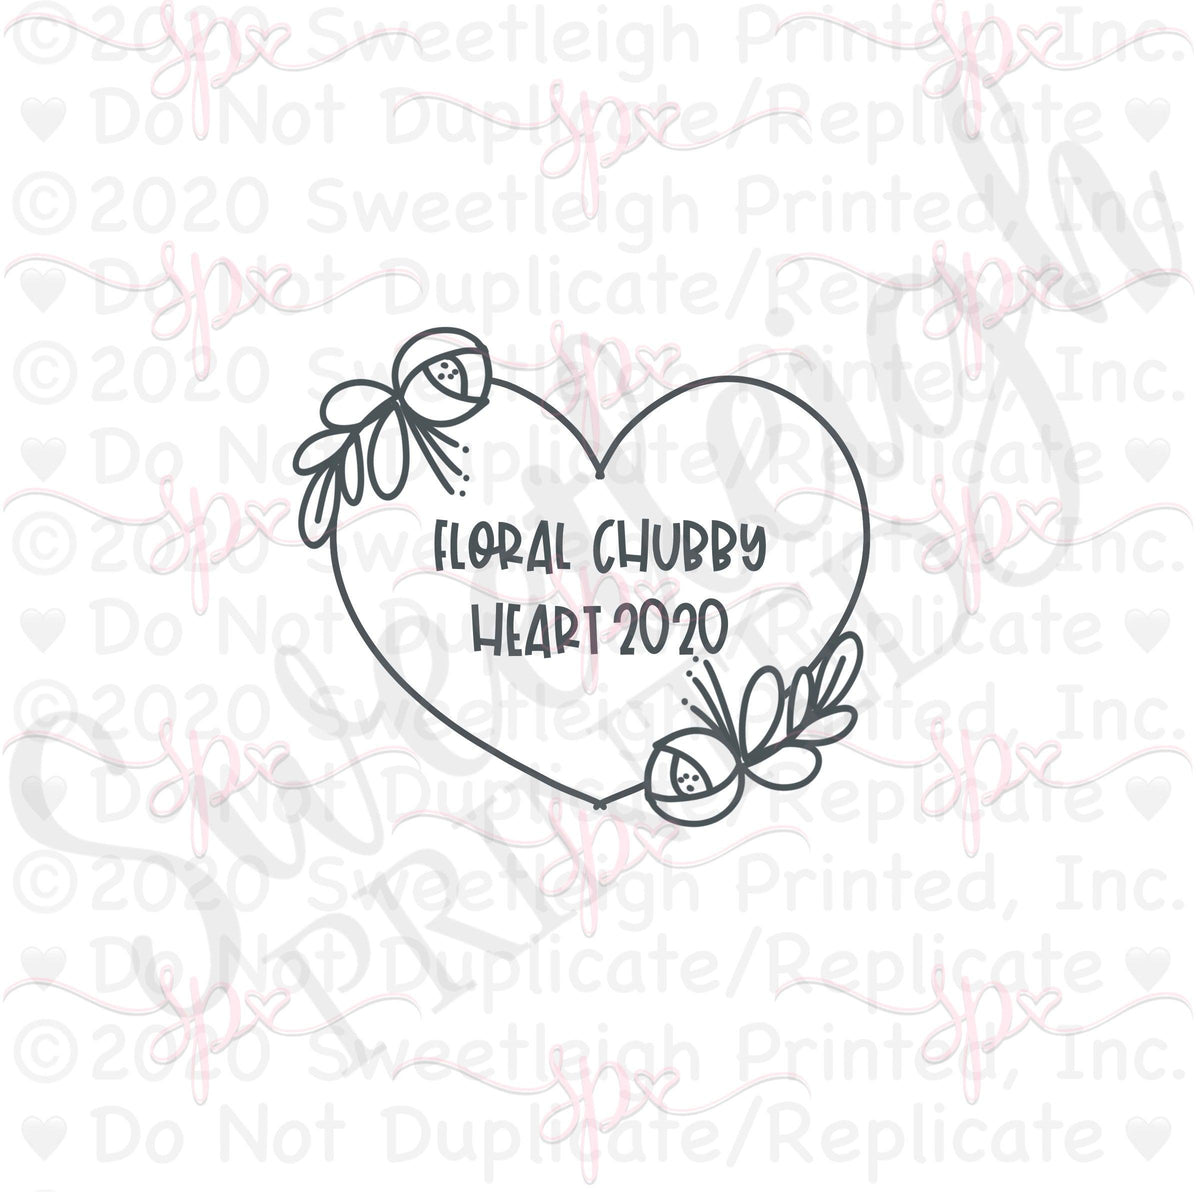 Floral Chubby Heart 2020 Cookie Cutter - Sweetleigh 